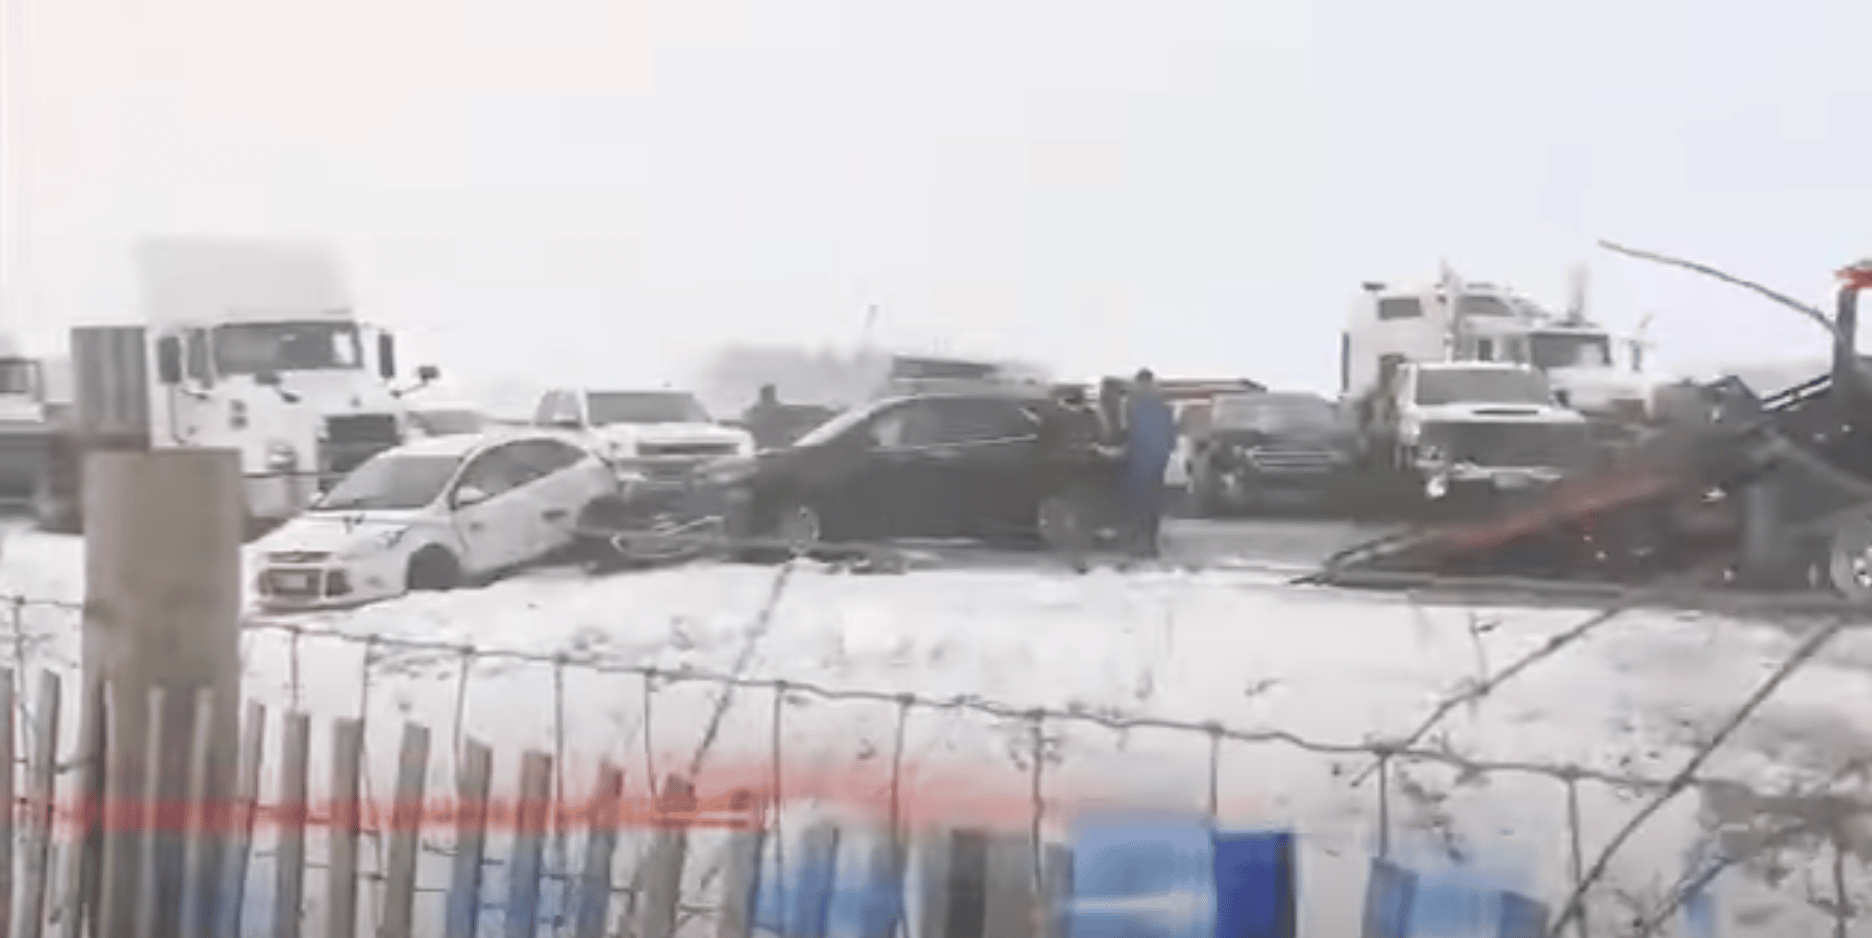 (WATCH) Horrific 85-vehicle pileup in Wisconsin injures 27, blocks major interstate for hours in both directions